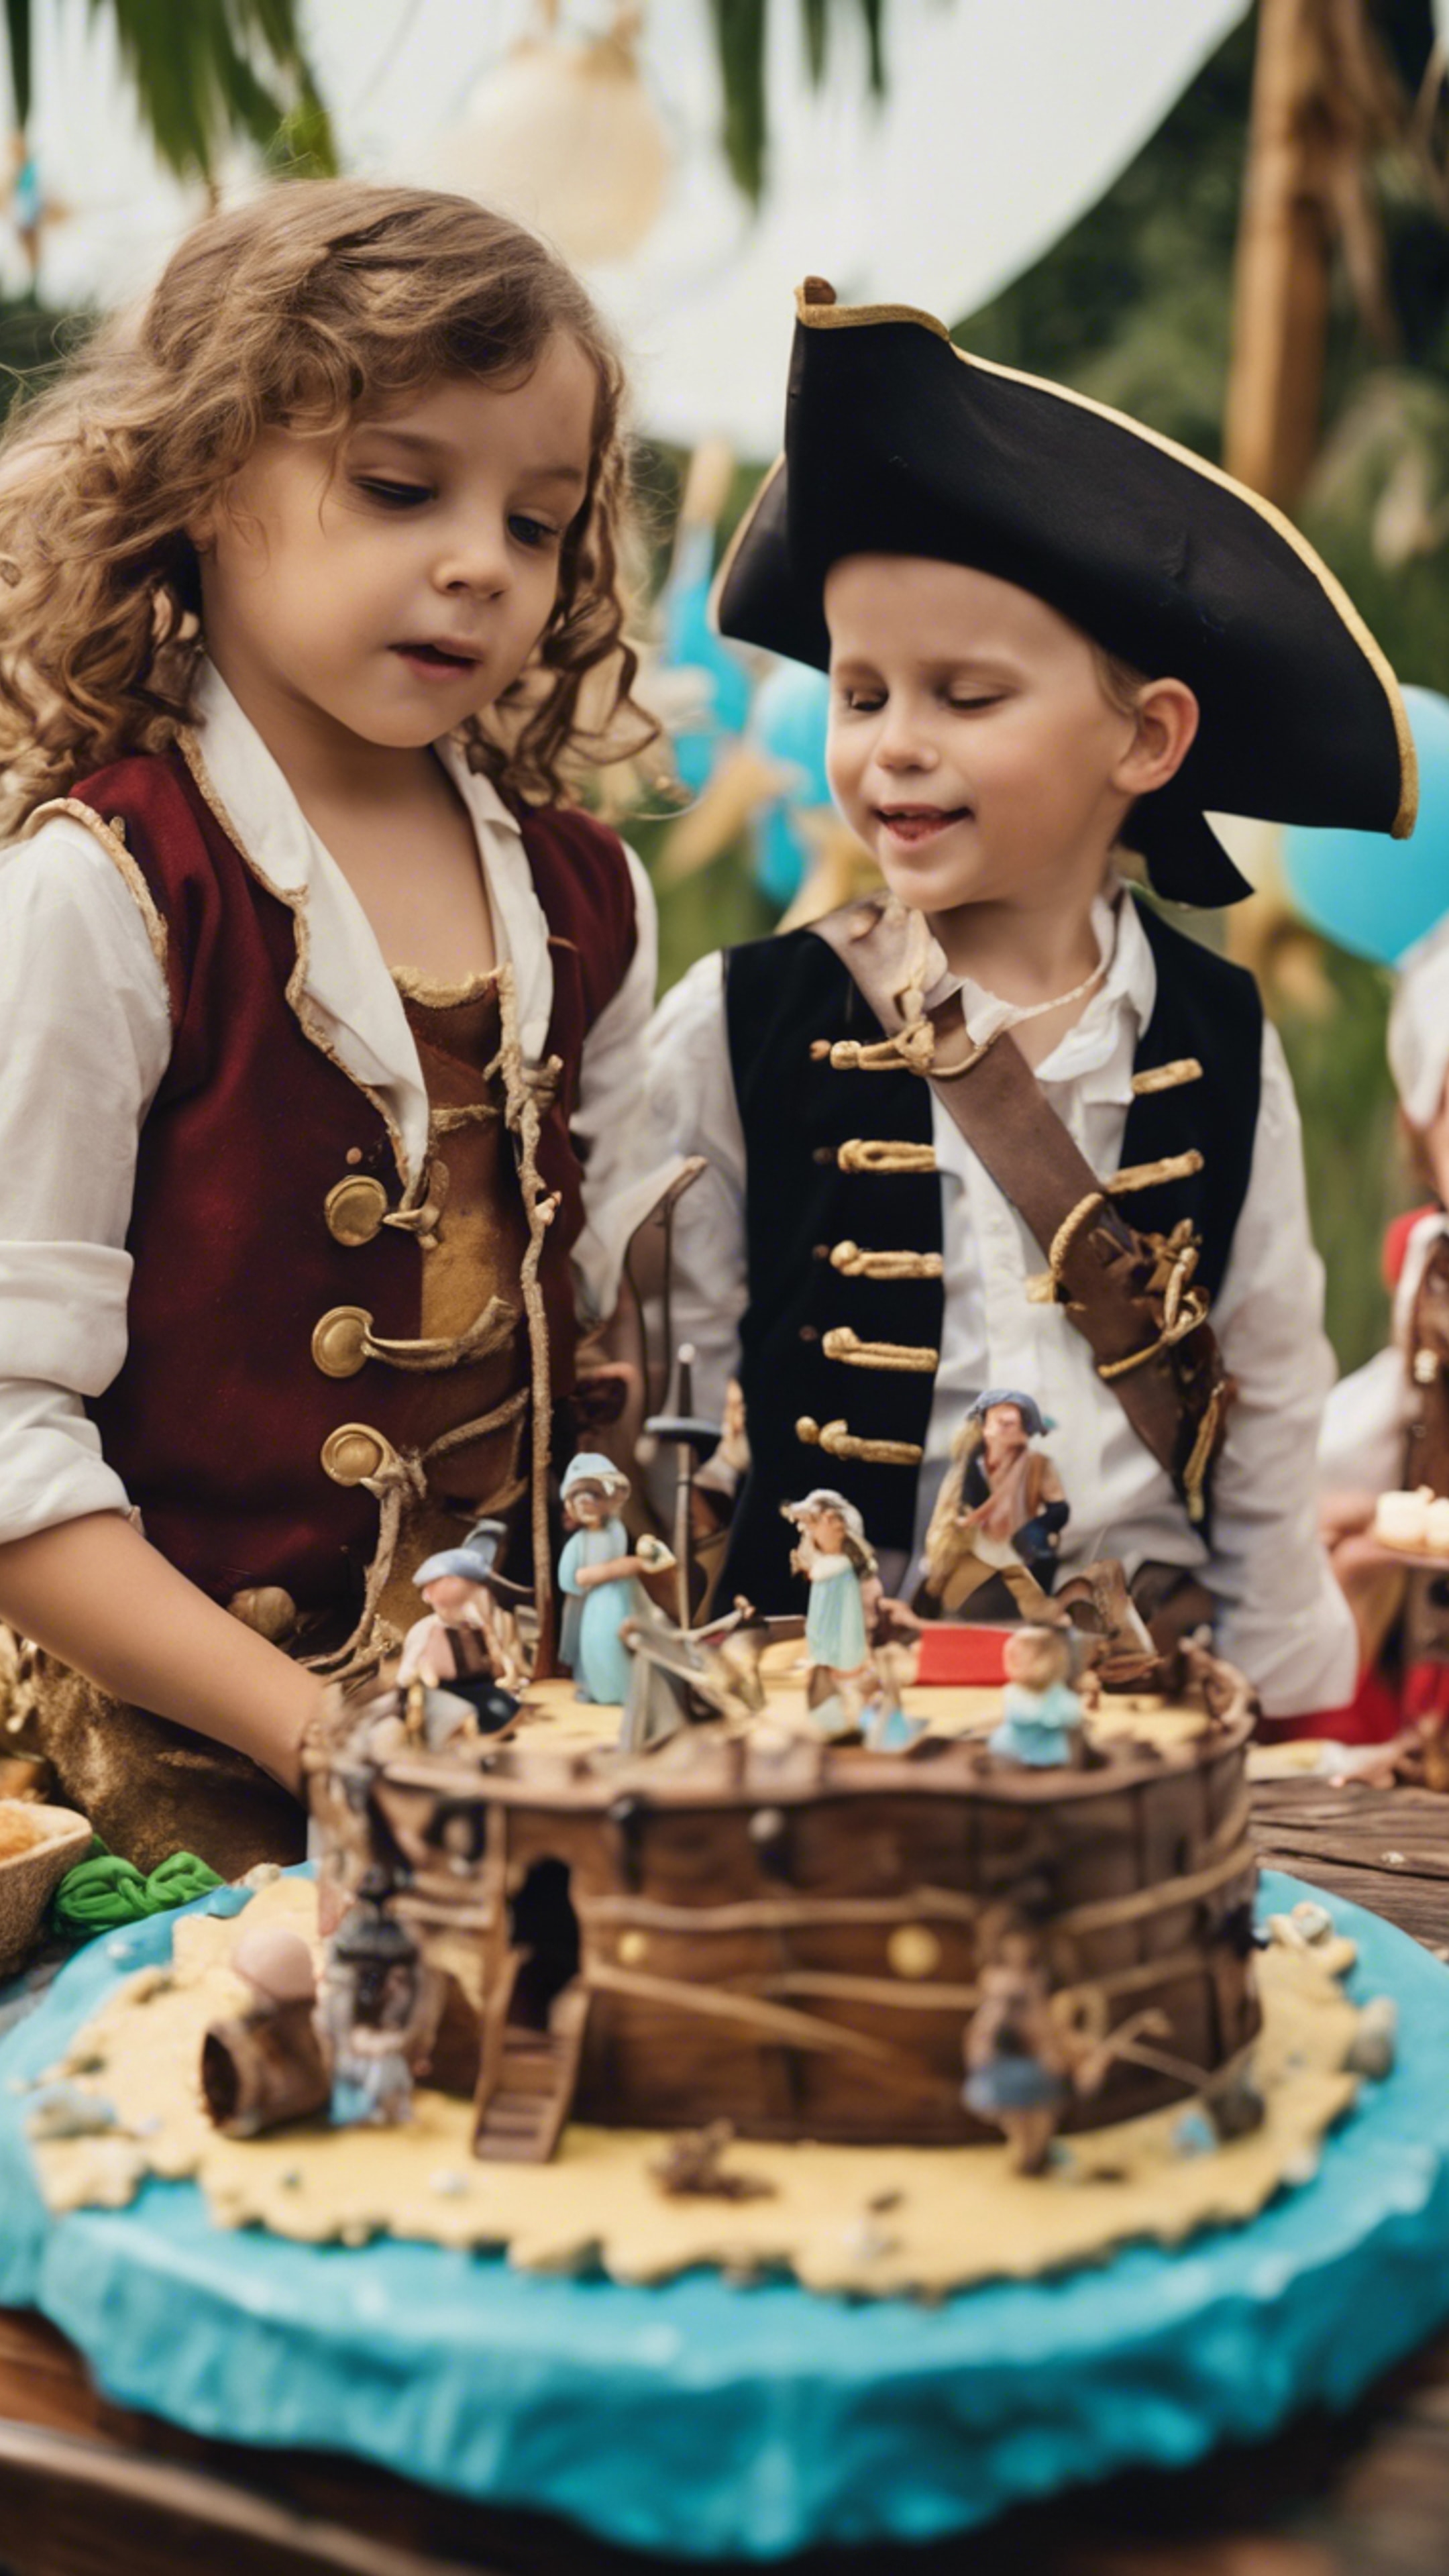 Children's pirate-themed birthday party with a treasure map, pirate ship cake and kids dressed as pirates. Hintergrund[fc1a6e05b86643309d7a]